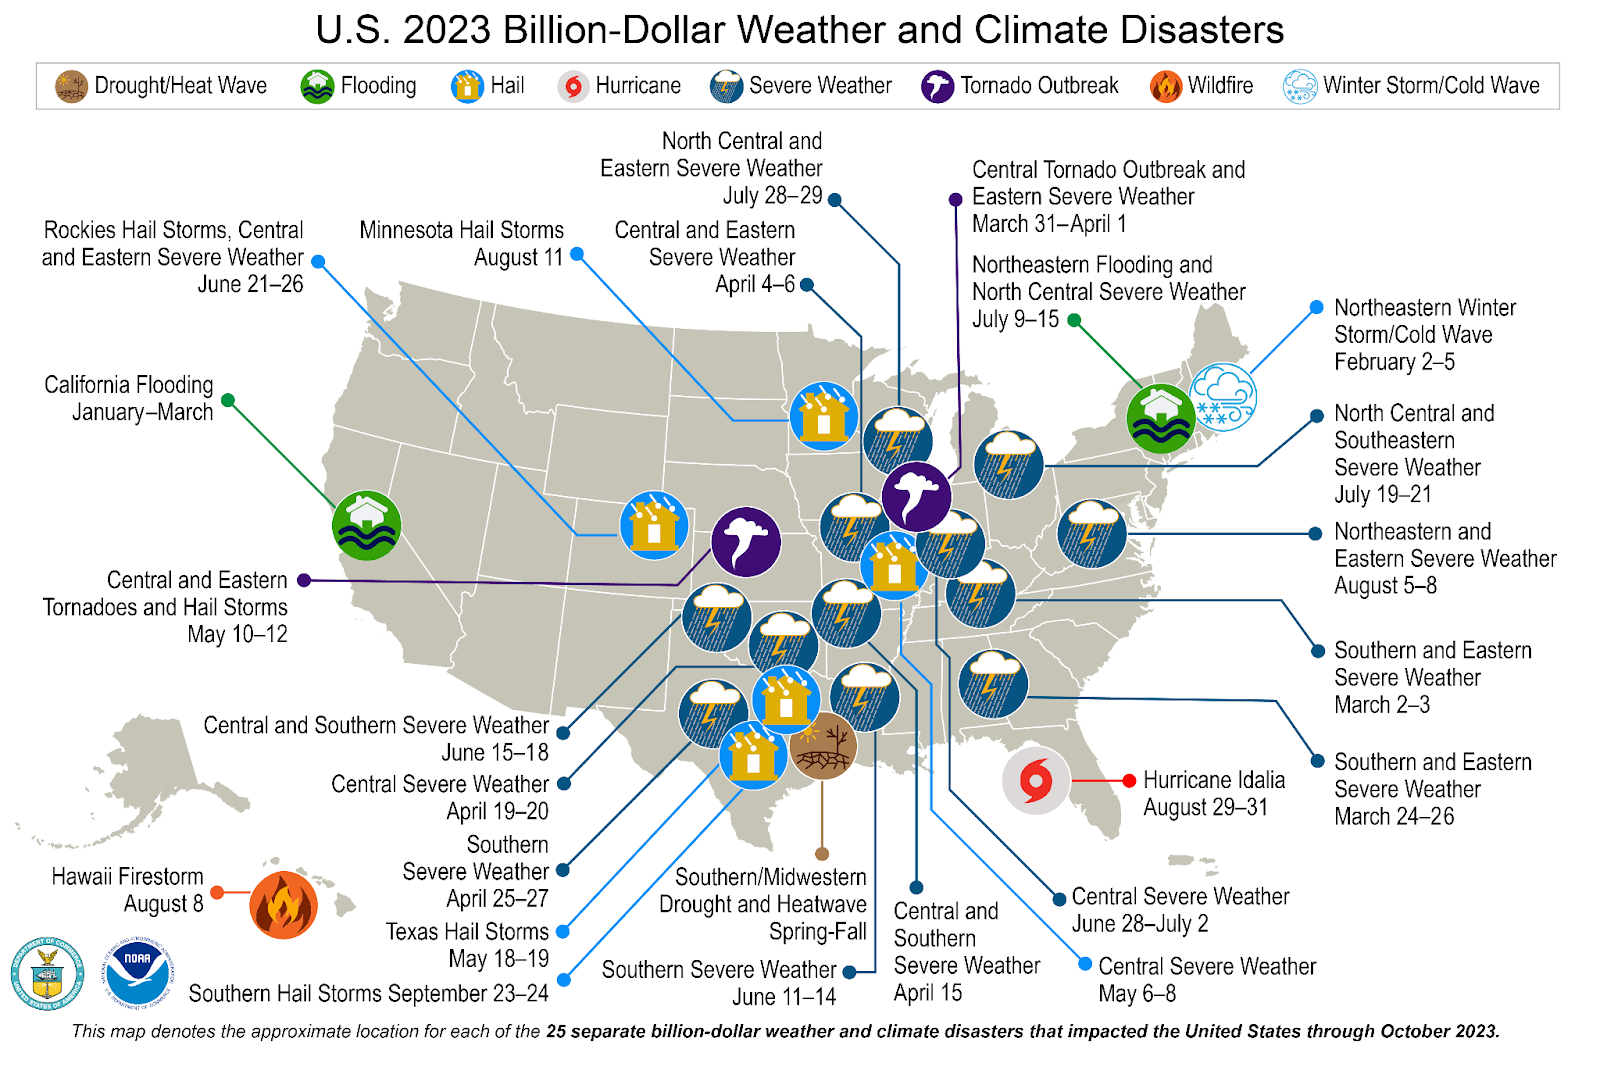 Map of the United States 2023 Billion-Dollar Weather and Climate Disasters, with 25 events shown on the map.